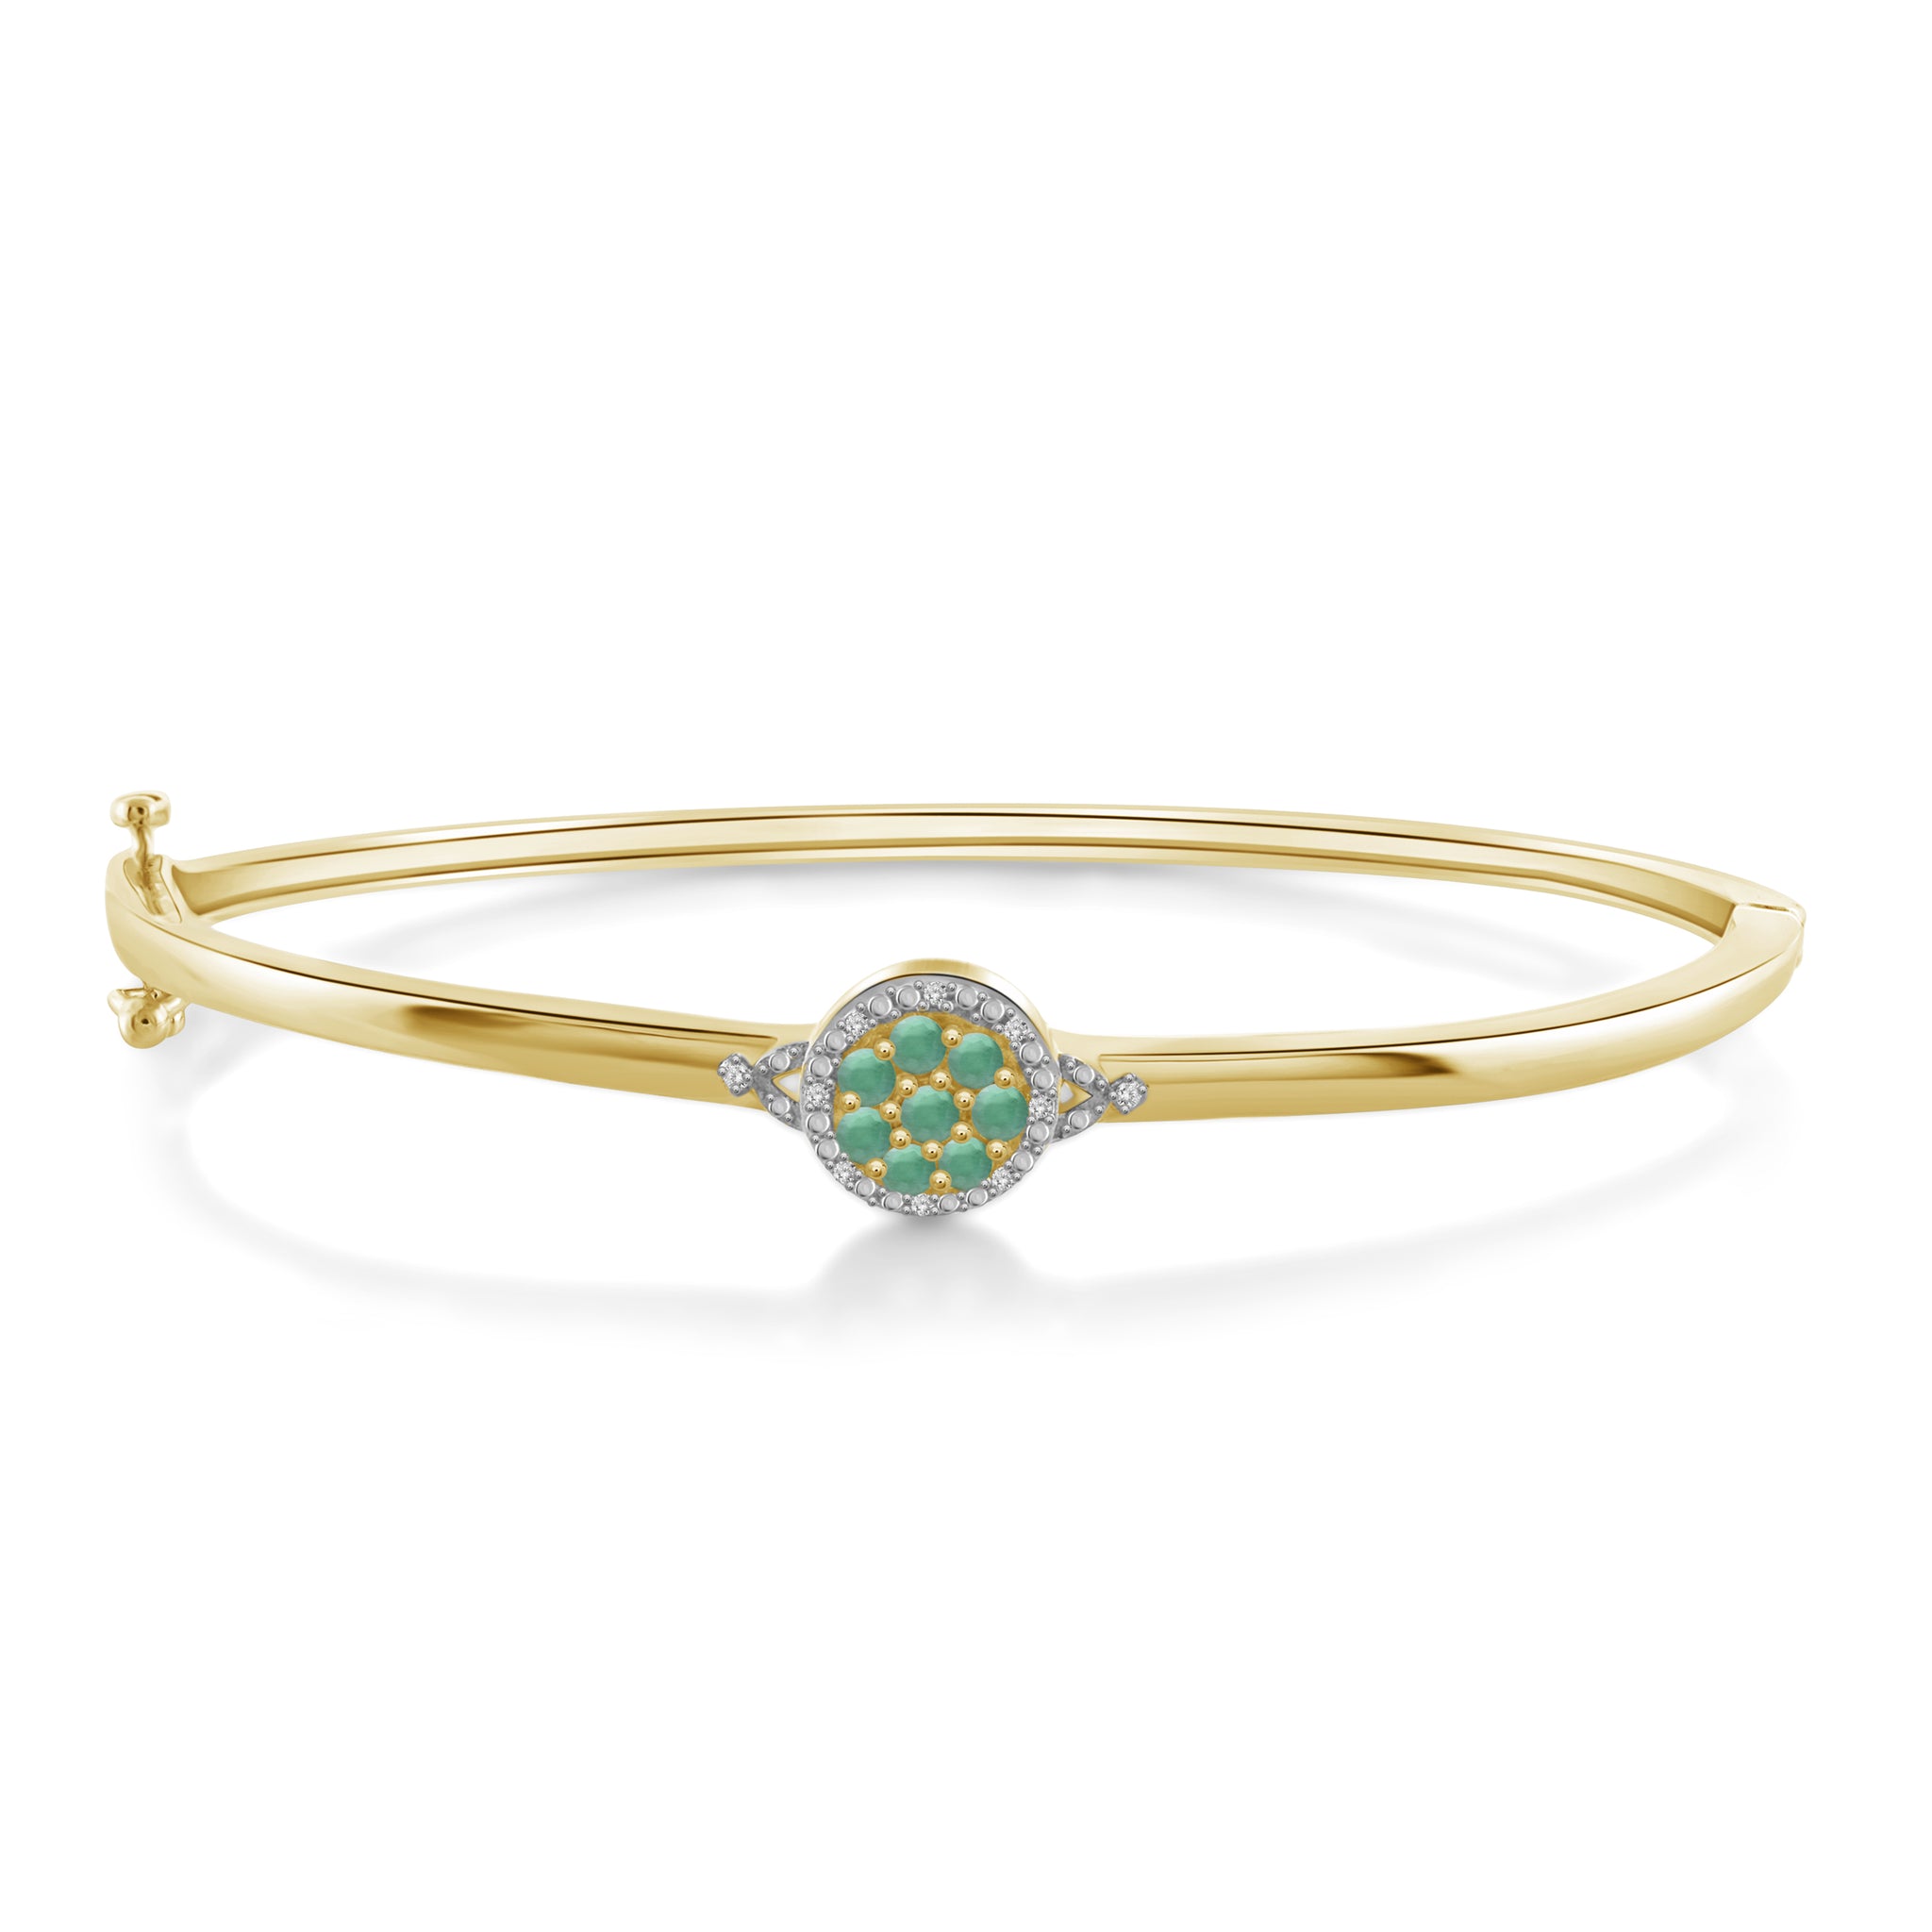 1/2 Carat T.G.W. Emerald And White Diamond Accent 14K Gold-Plated Bangle